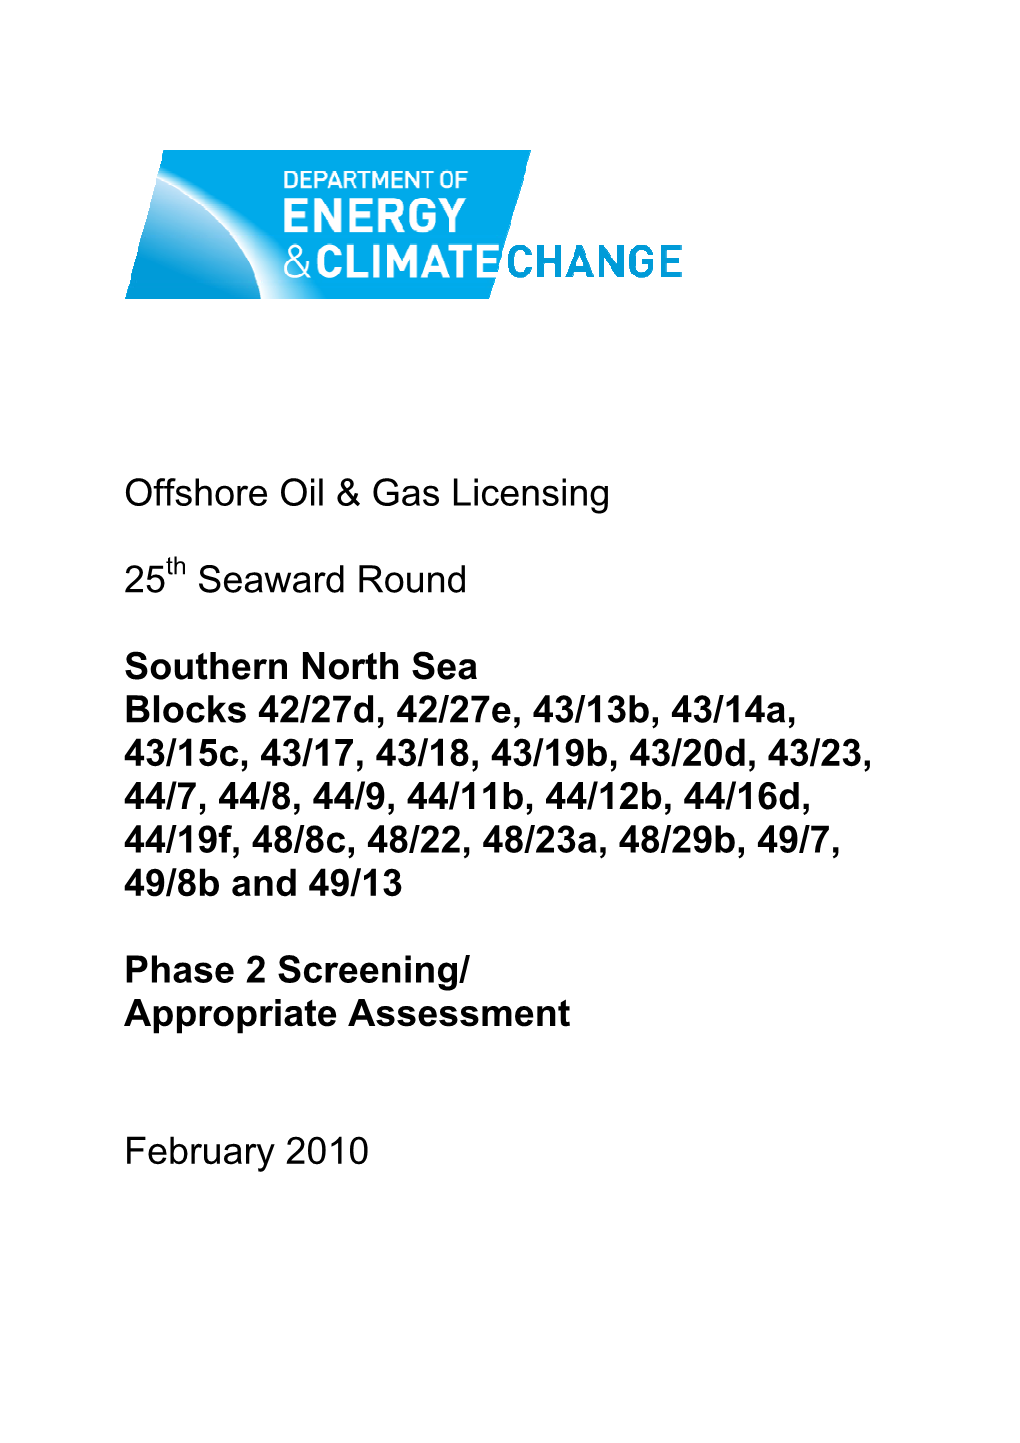 Offshore Oil & Gas Licensing 25 Seaward Round Southern North